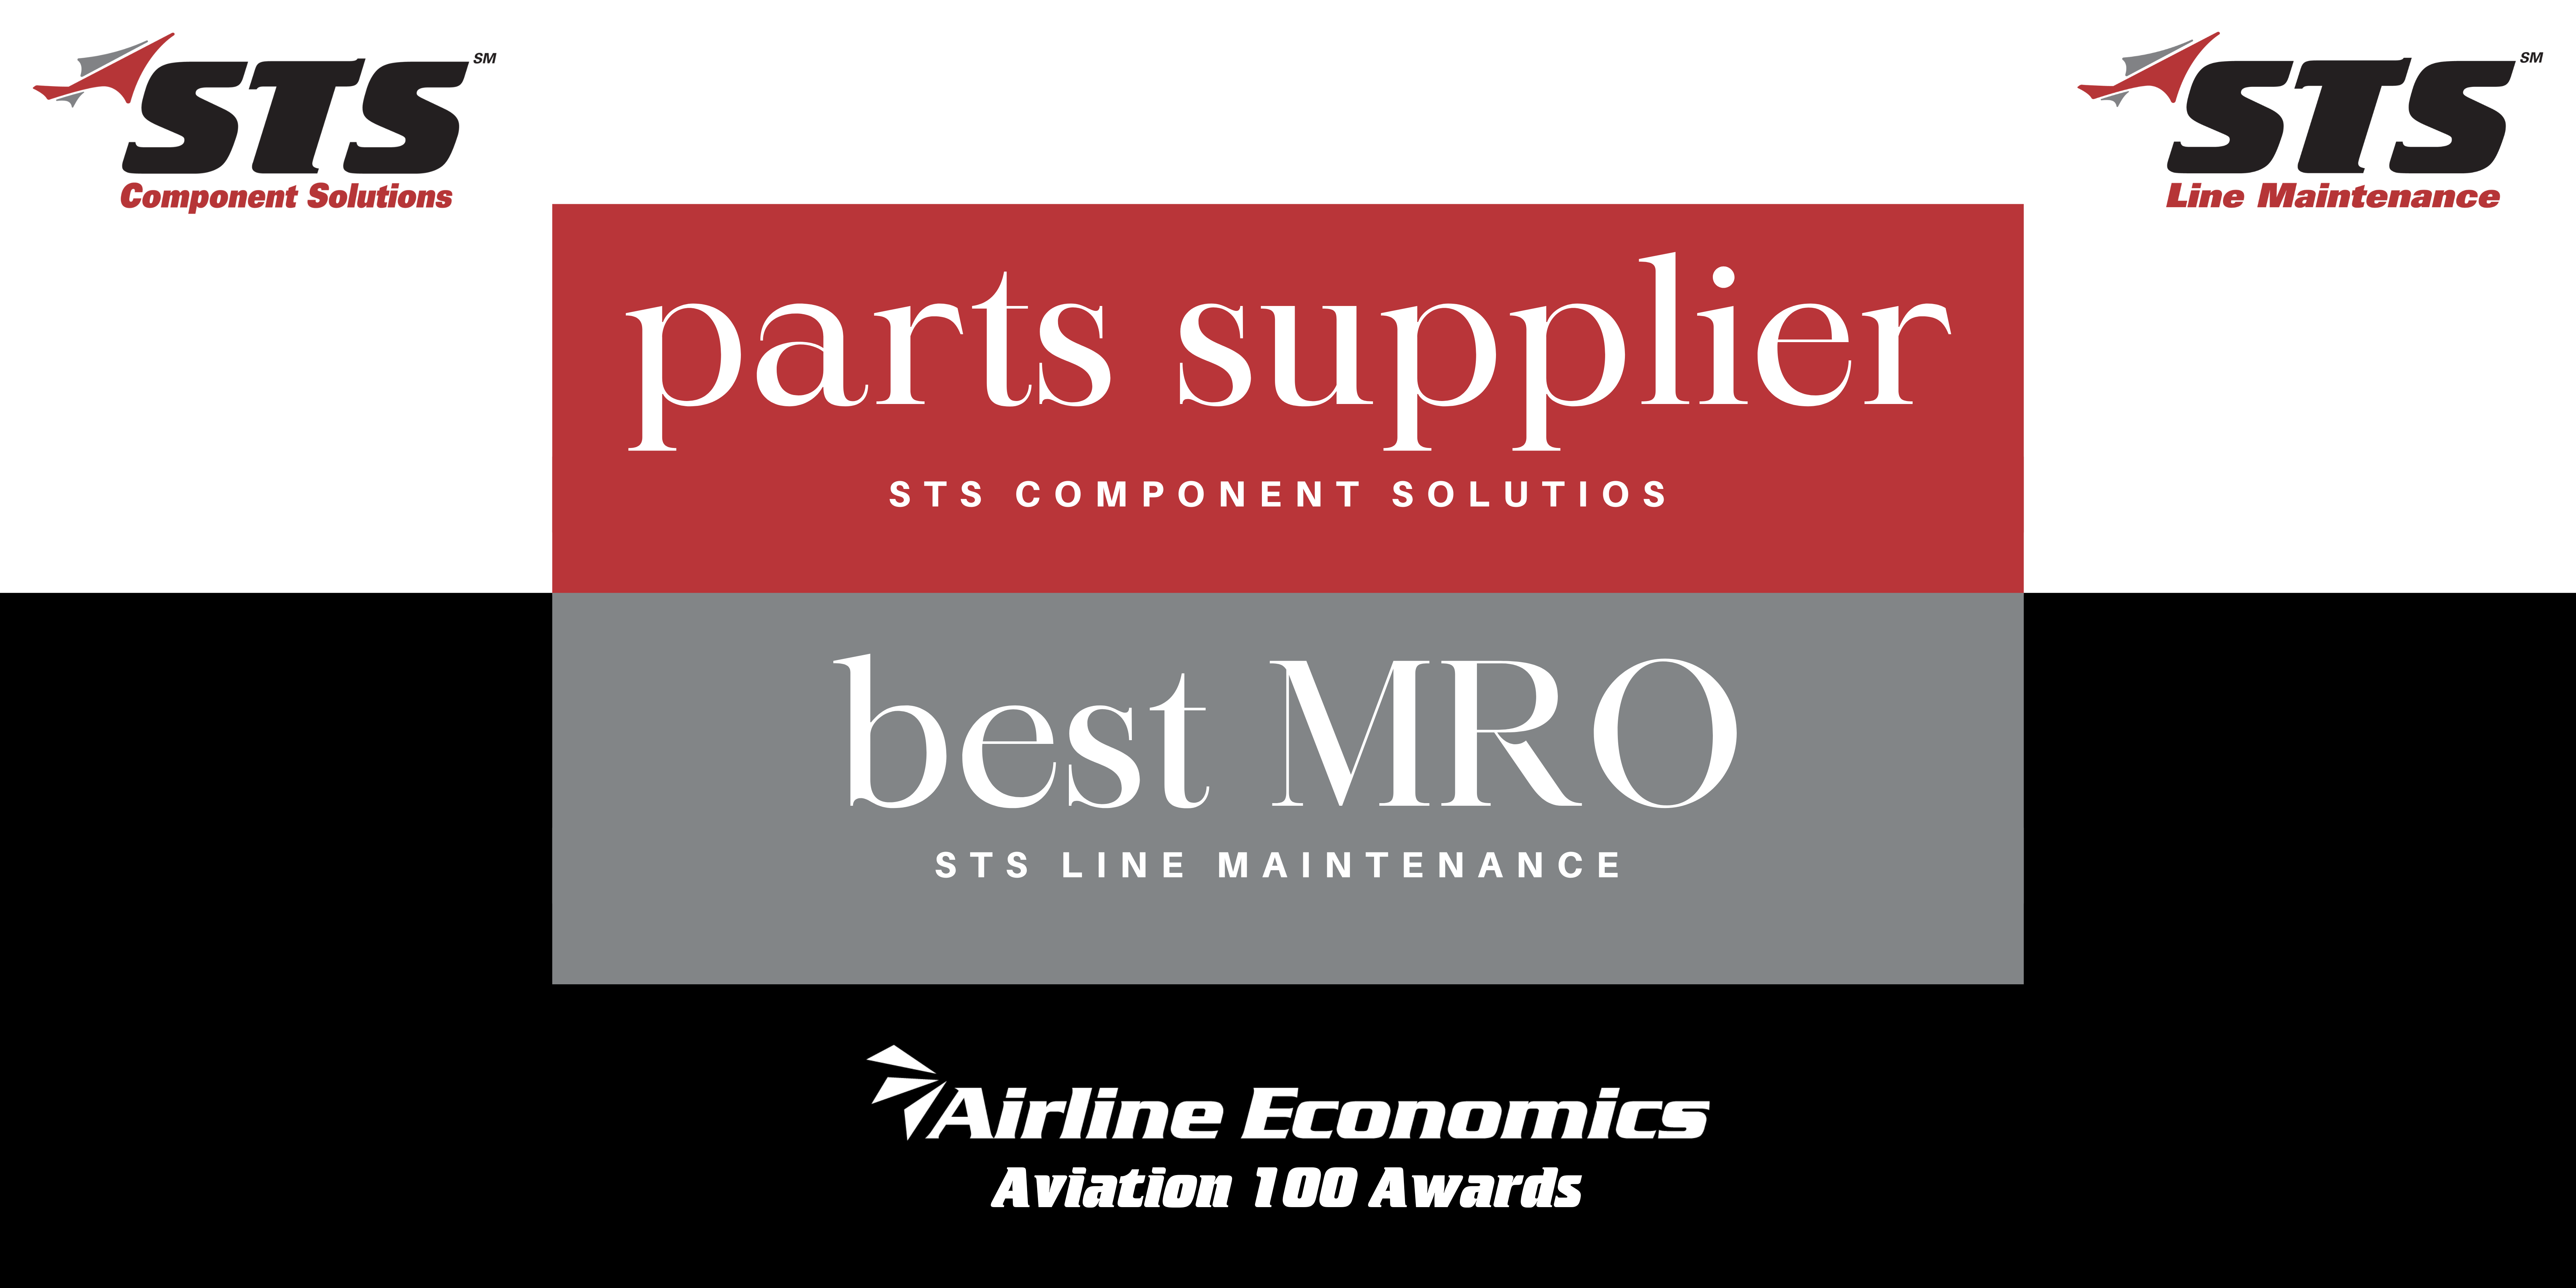 ✈ Aviation 100 Awards: Vote STS Component Solutions & STS Line Maintenance